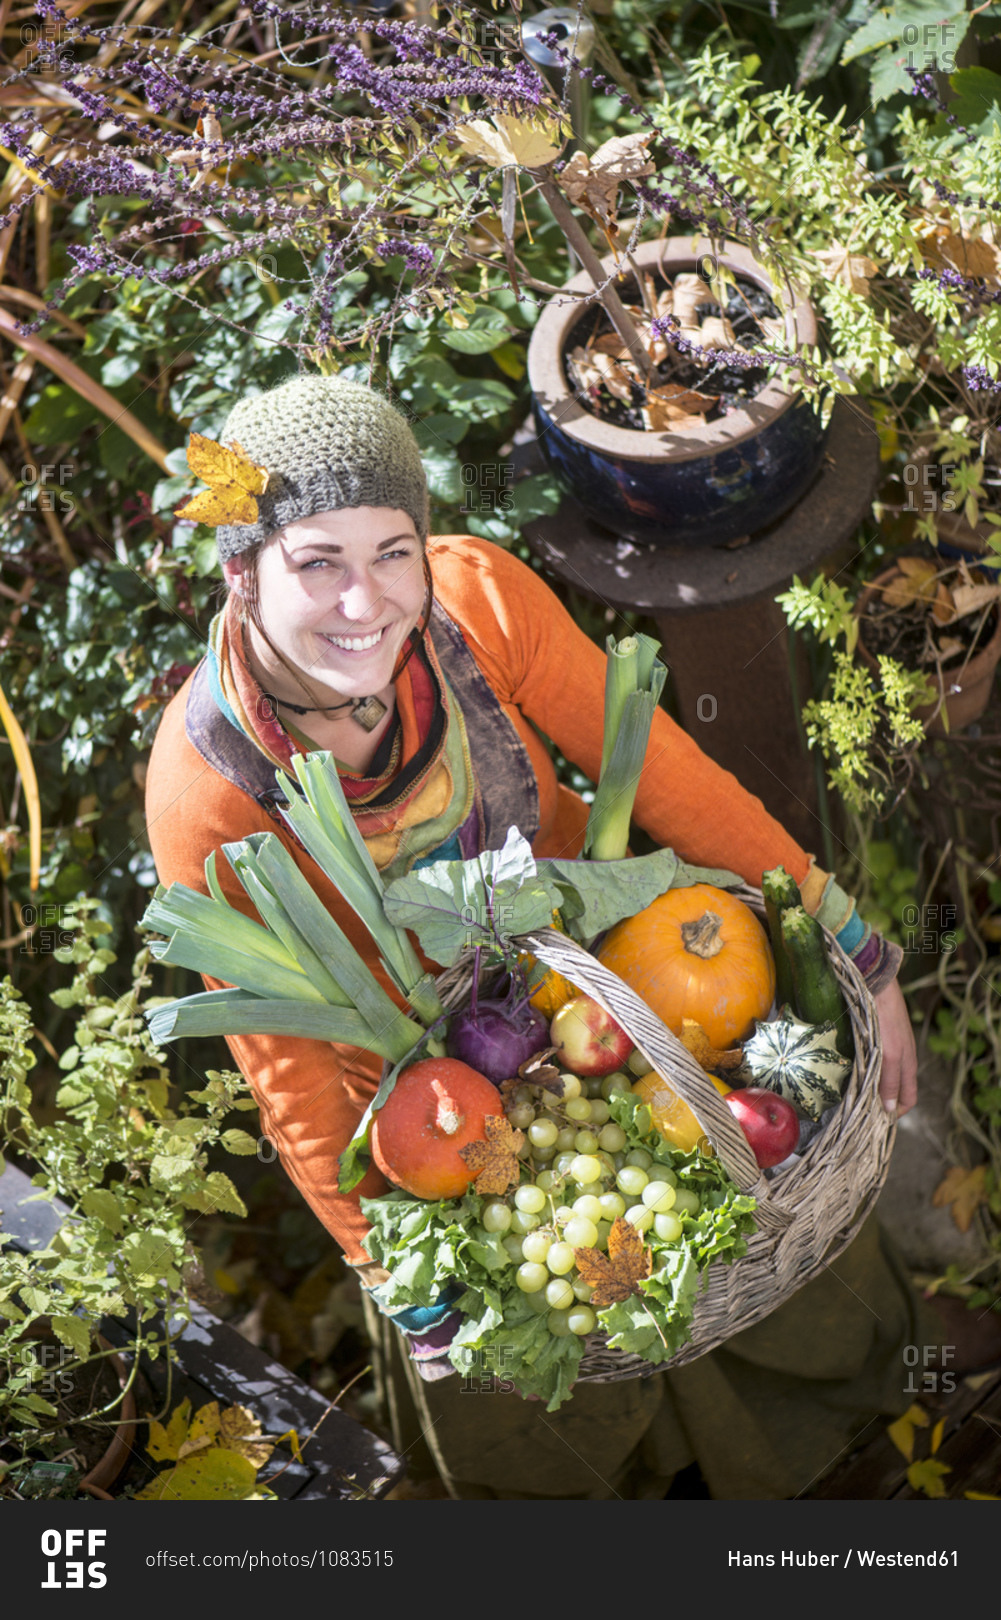 Smiling woman carrying fruit and vegetable basket while standing in garden